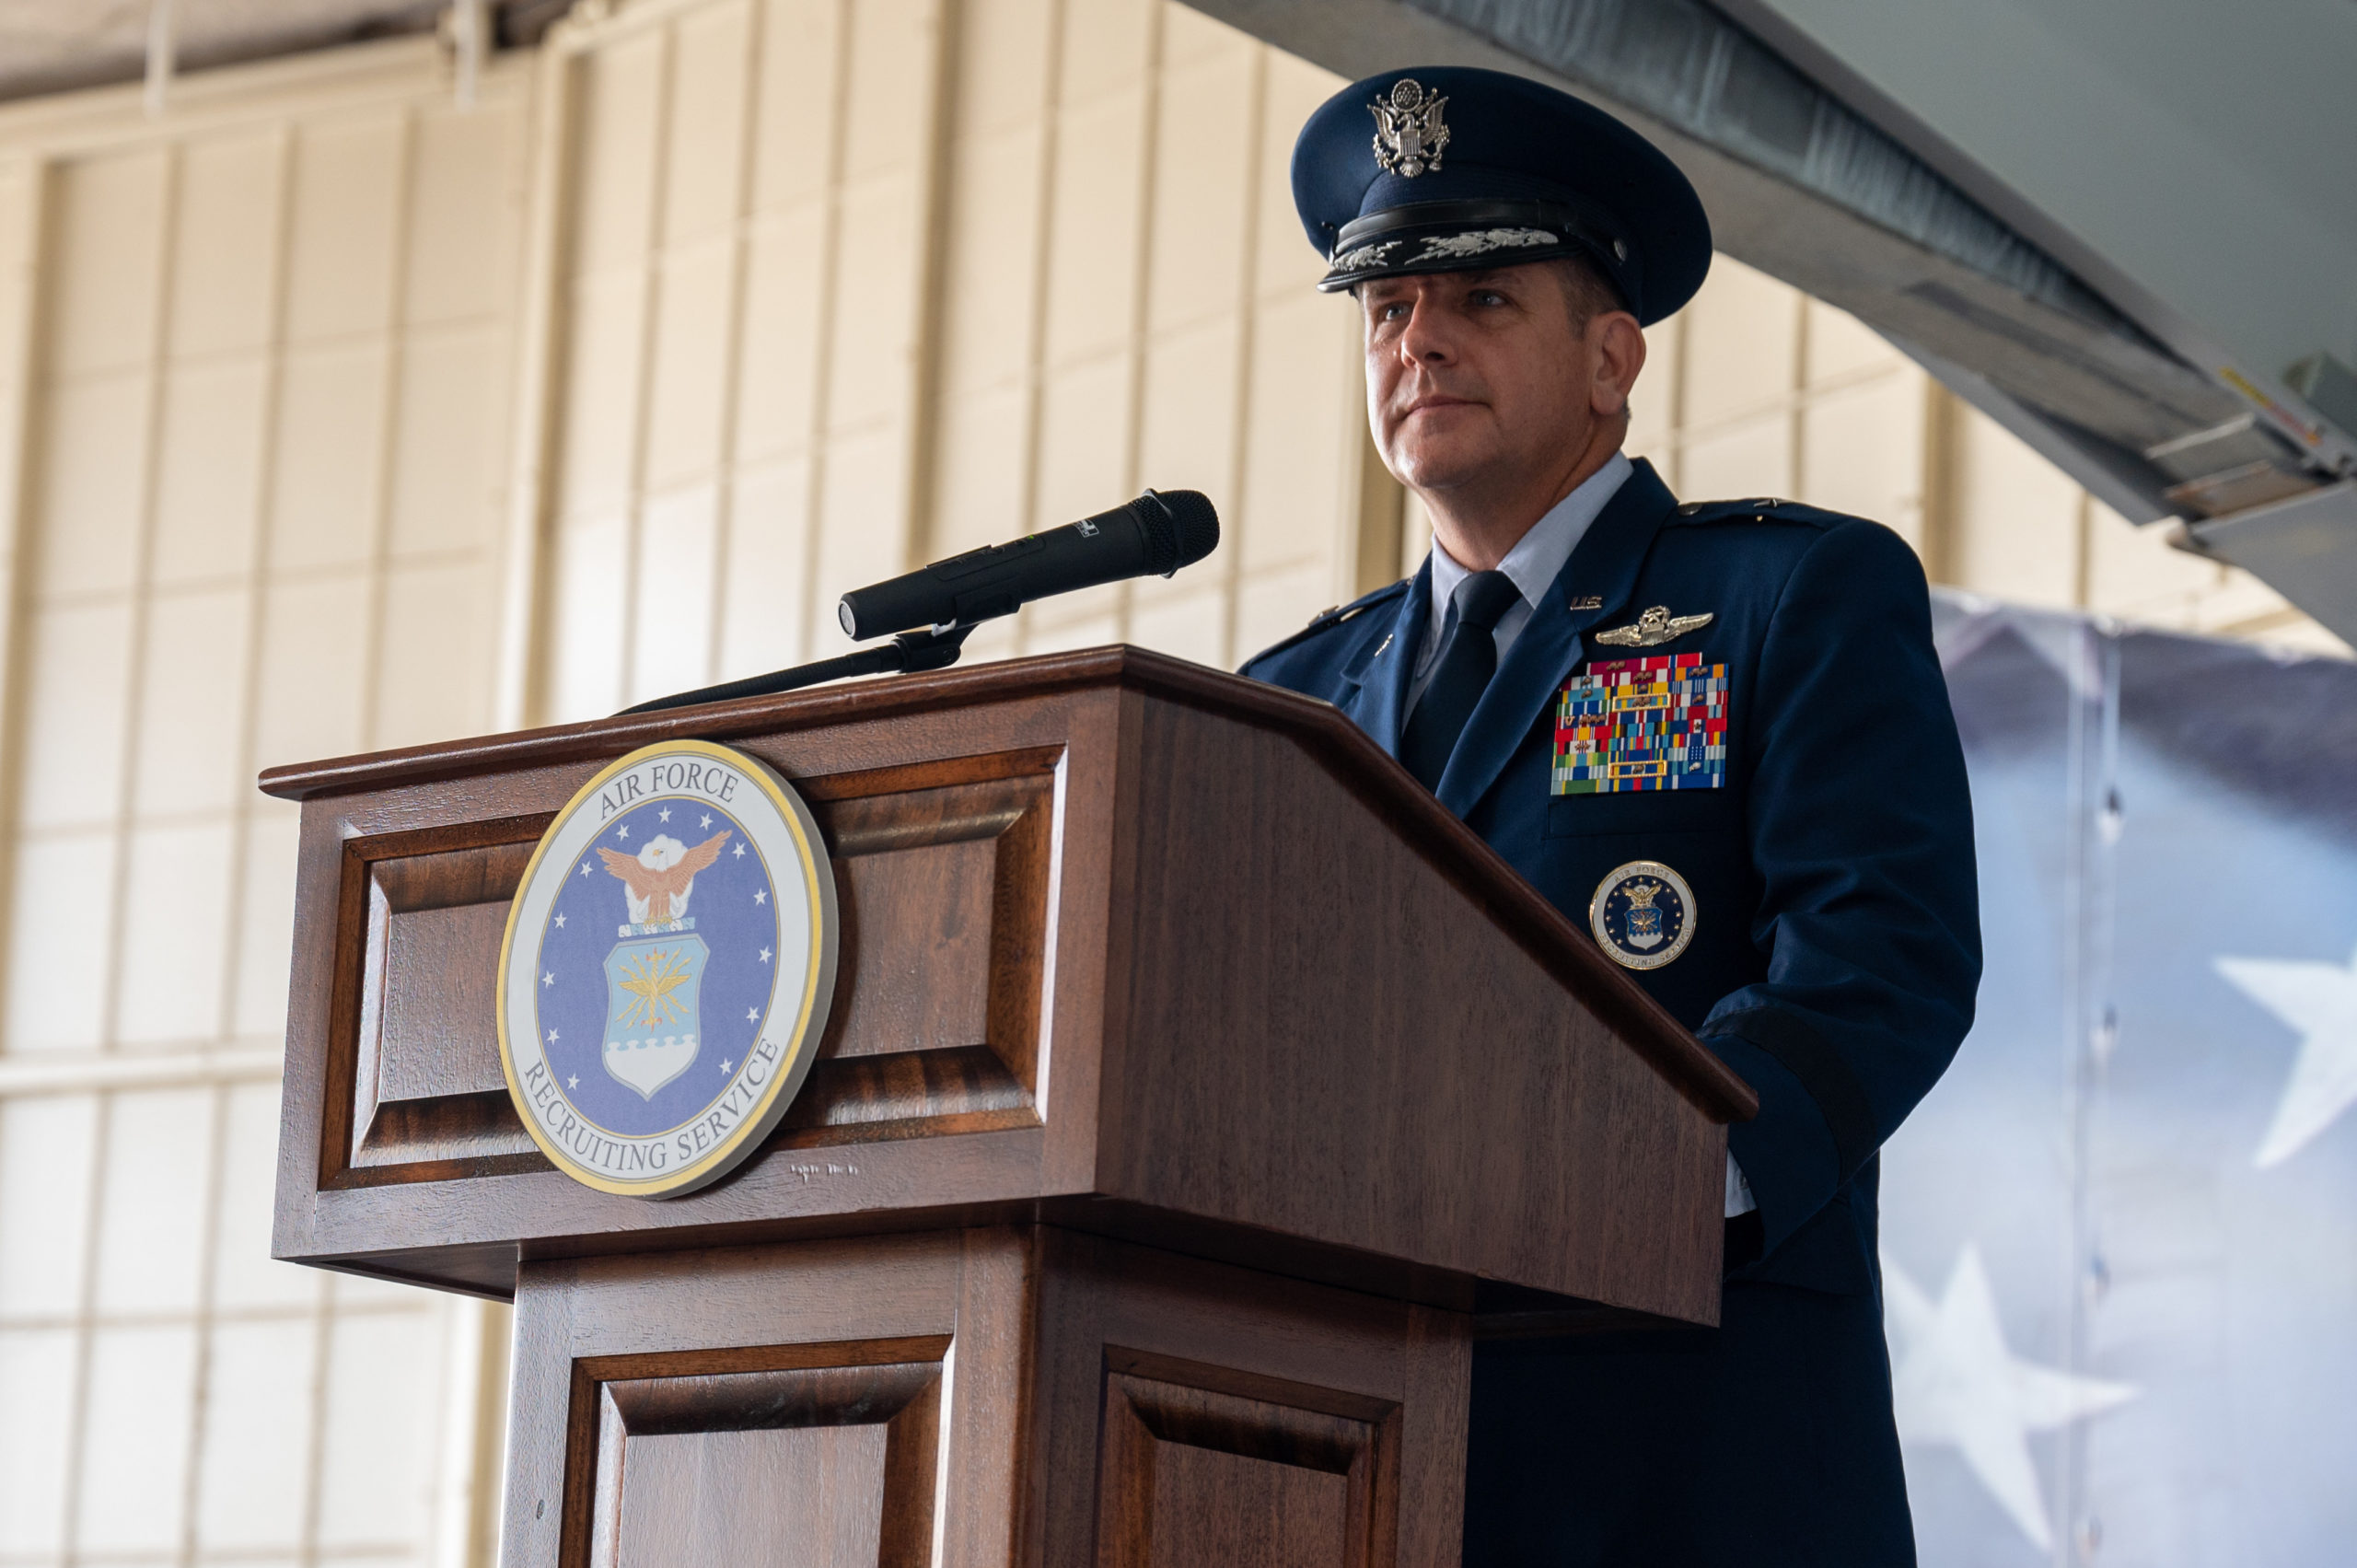 New Leader Takes Over Air Force Recruiting as Challenges Persist